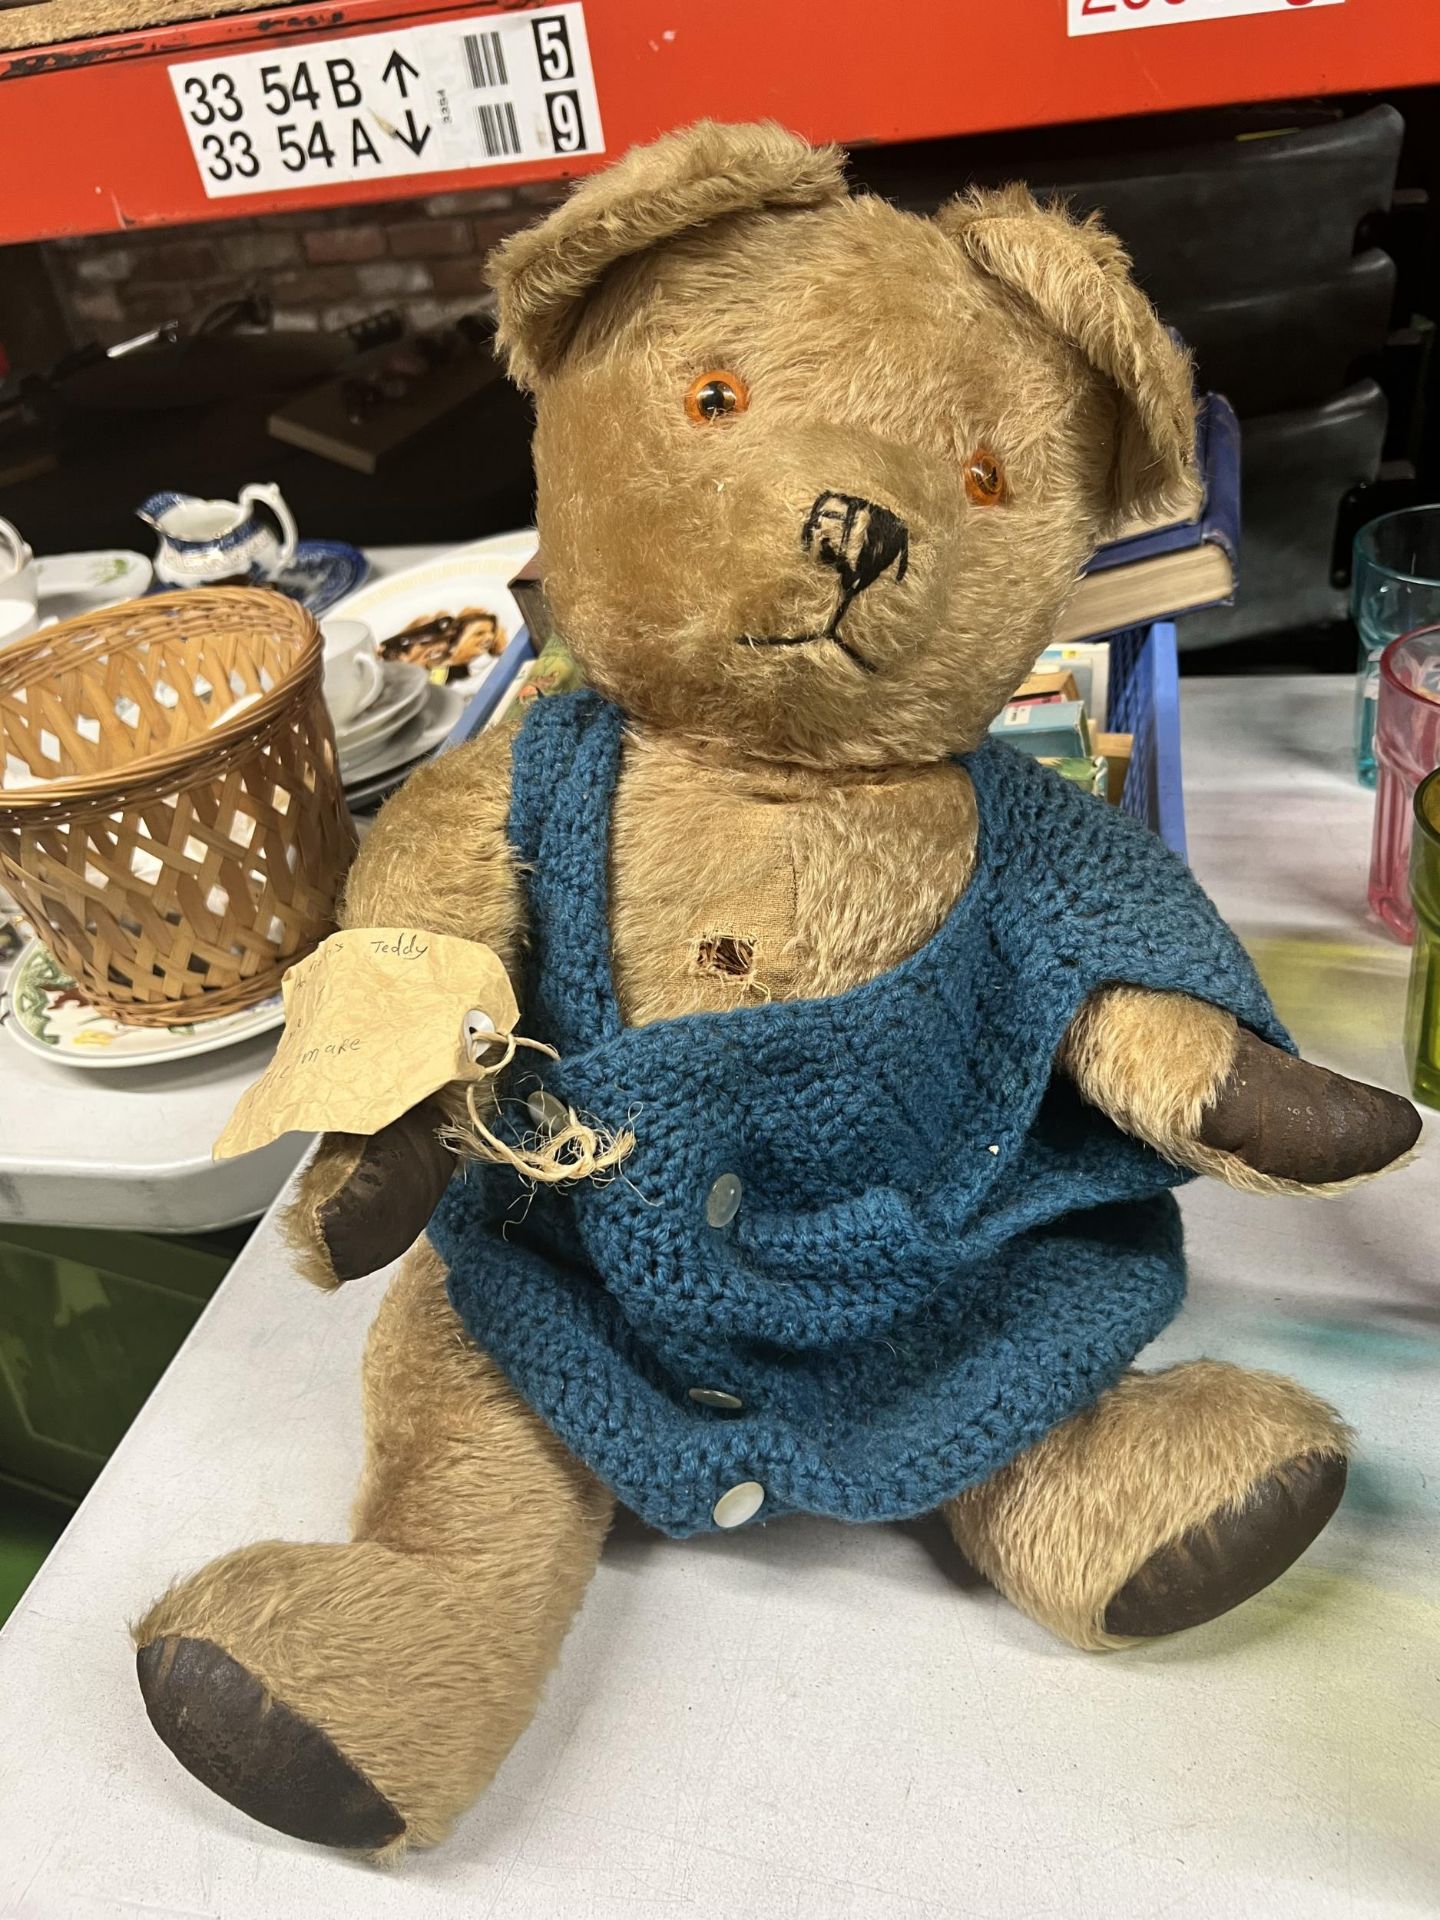 A VERY WELL LOVED VINTAGE TEDDY BEAR, STRAW FILLED, AS OWNED BY HANNAH, AGE 7